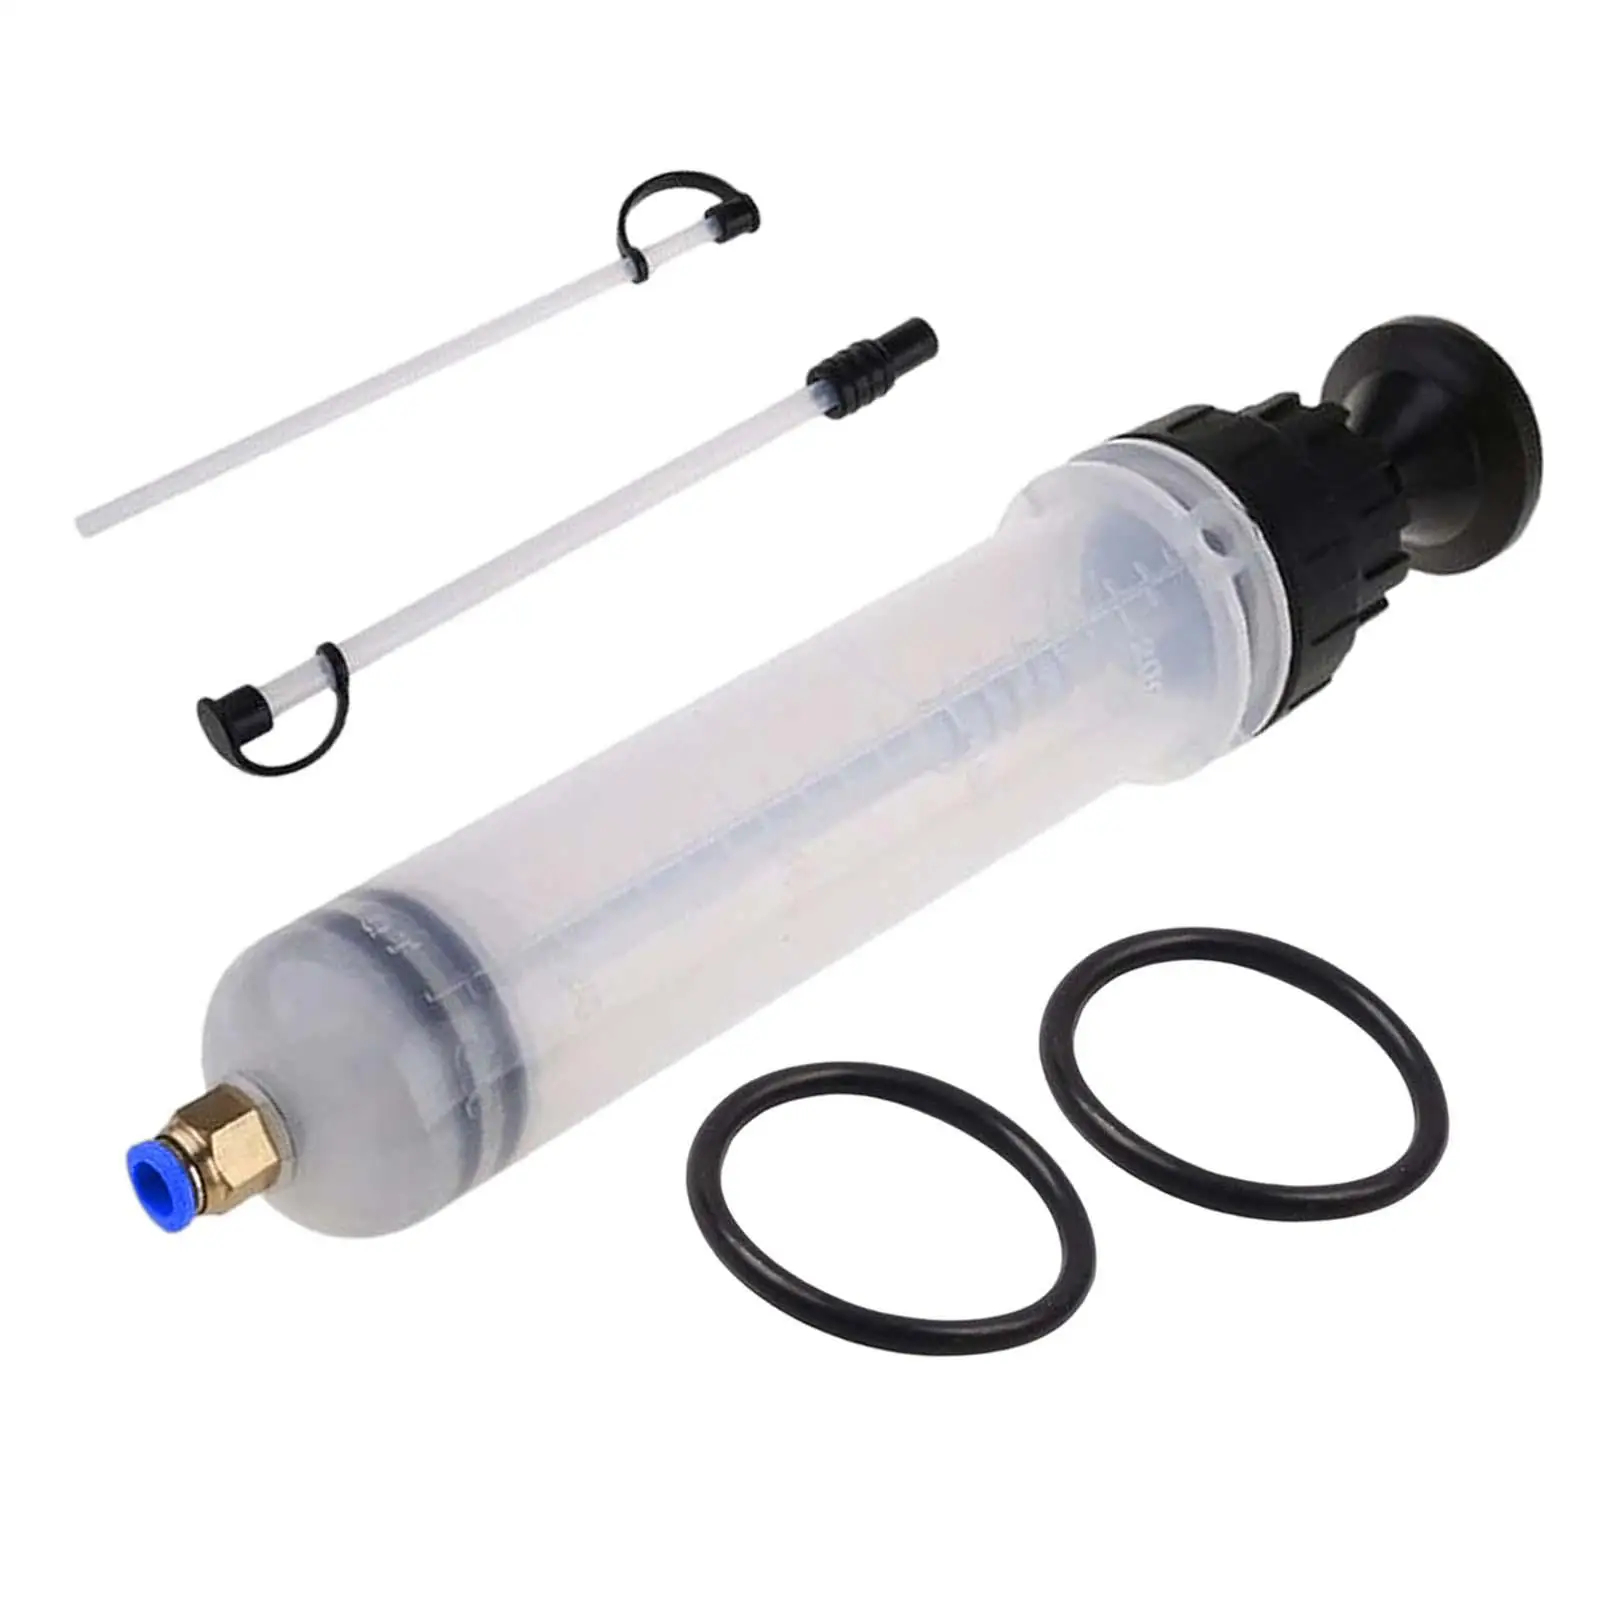 Auto Brake Fluid Extractor Fluid Transfer Hand Pump Tool 500cc Oil Change Fluid Extraction for Vehicles Motorcycle RV ATV